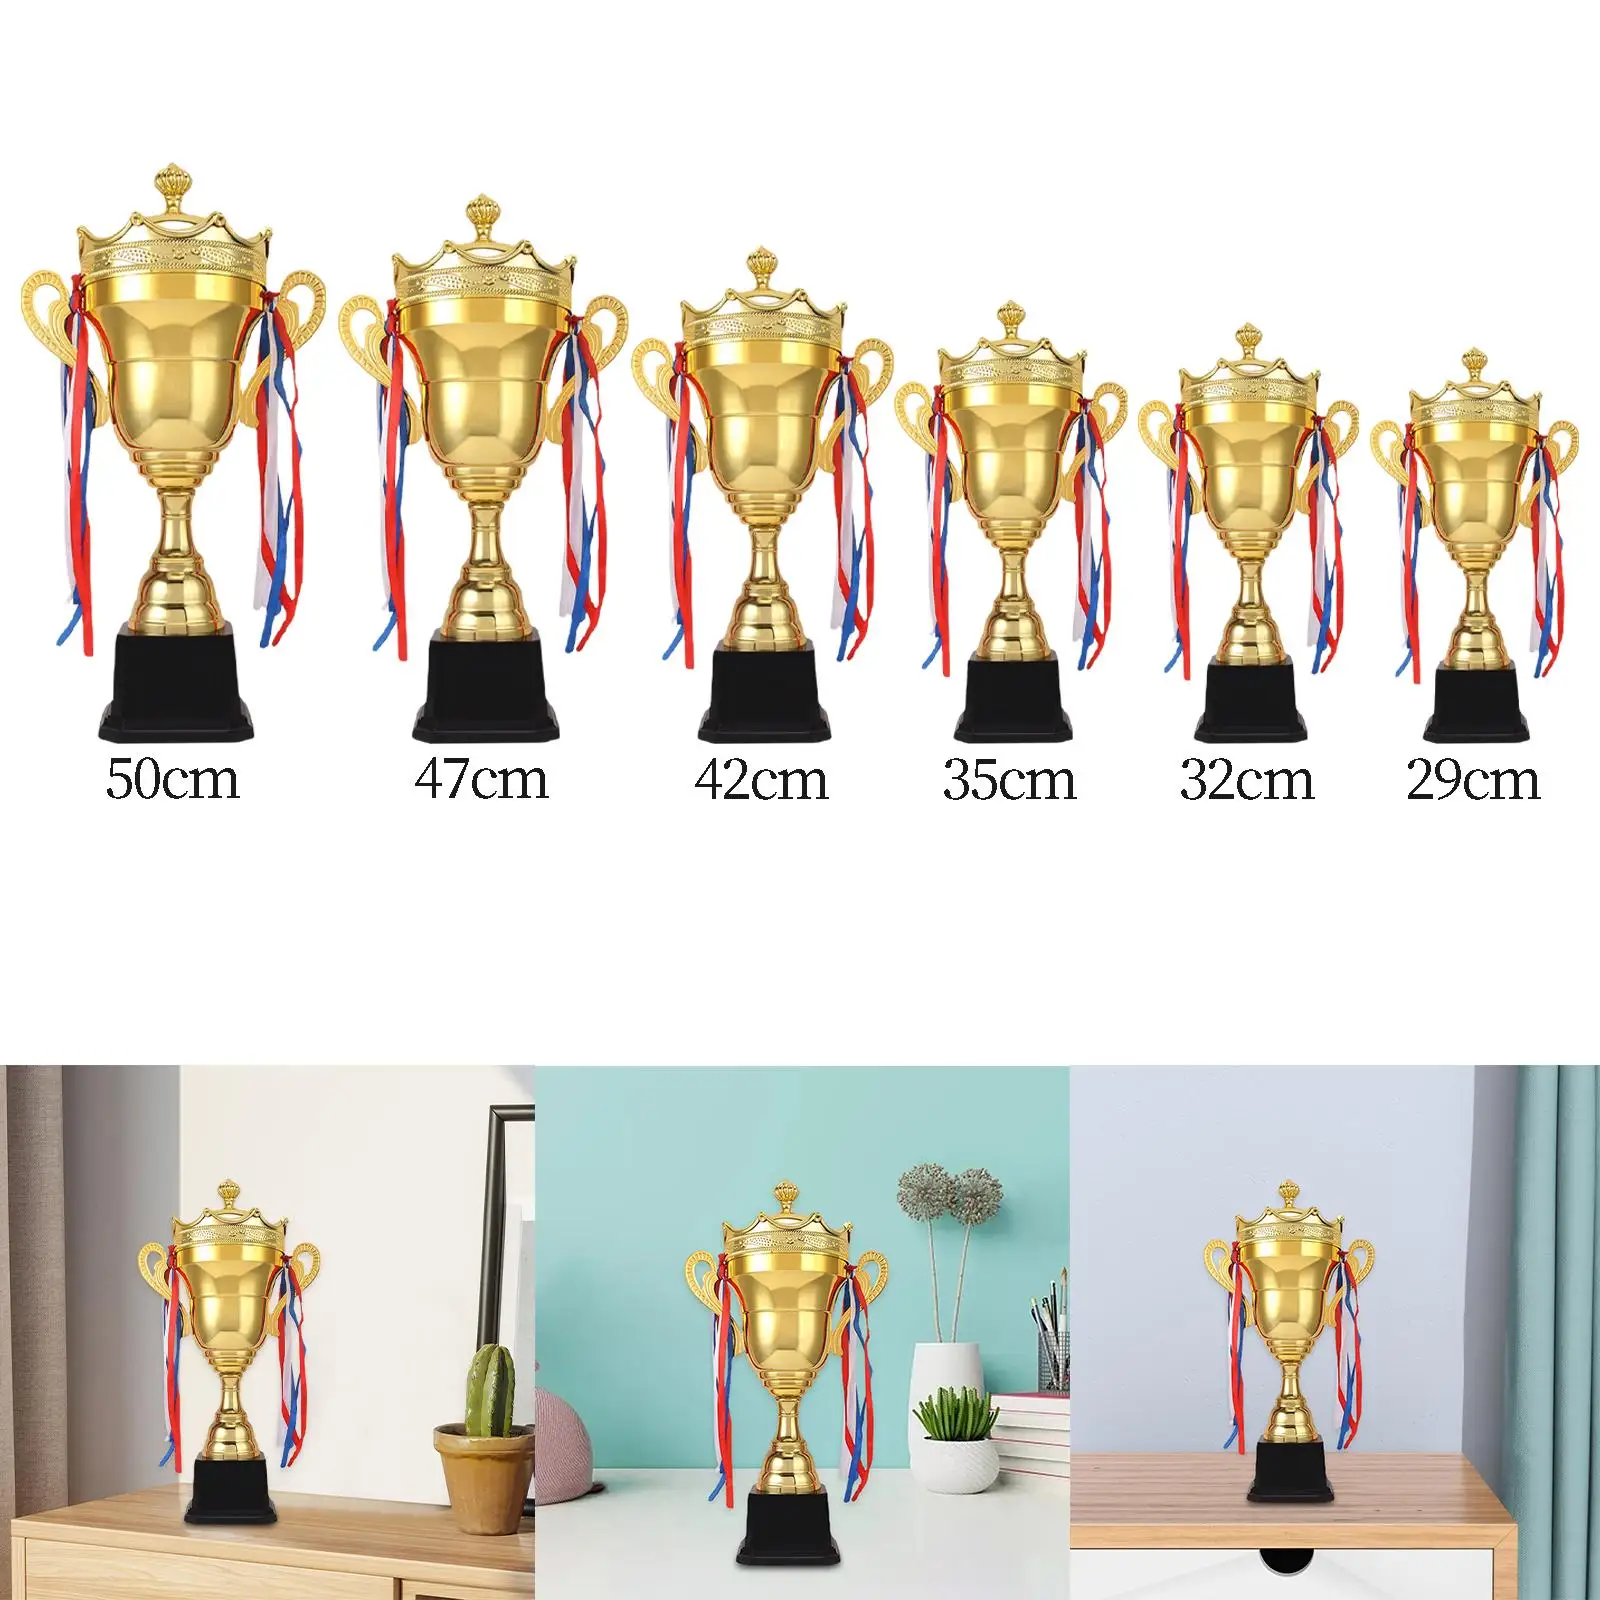 Award Trophy Event Props Winner Trophies with Ribbon Decor Souvenir Prizes for